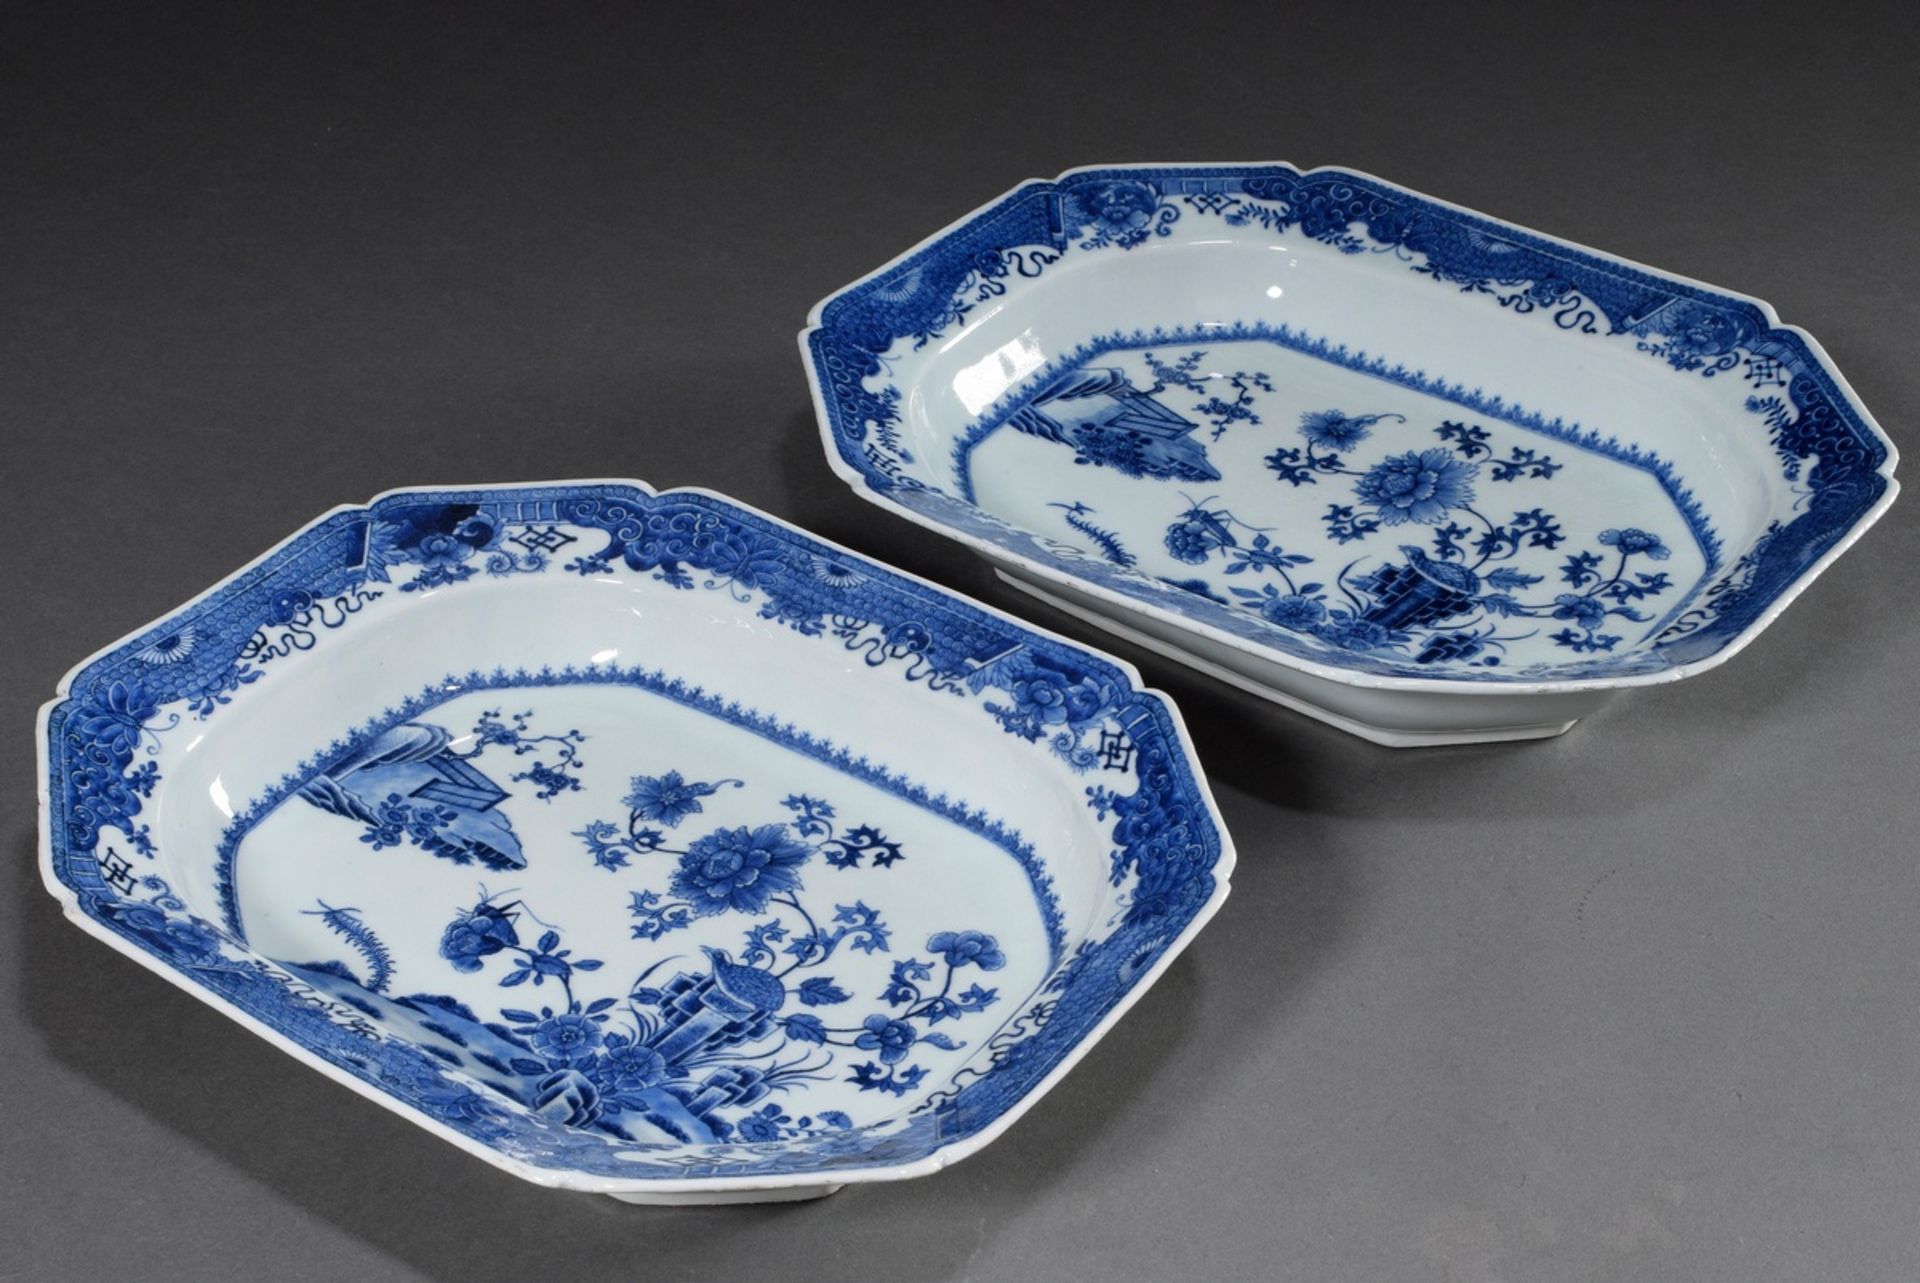 Pair of deeply moulded octagonal plates with fine blue painting decoration "Garden with Partridge a - Image 2 of 5